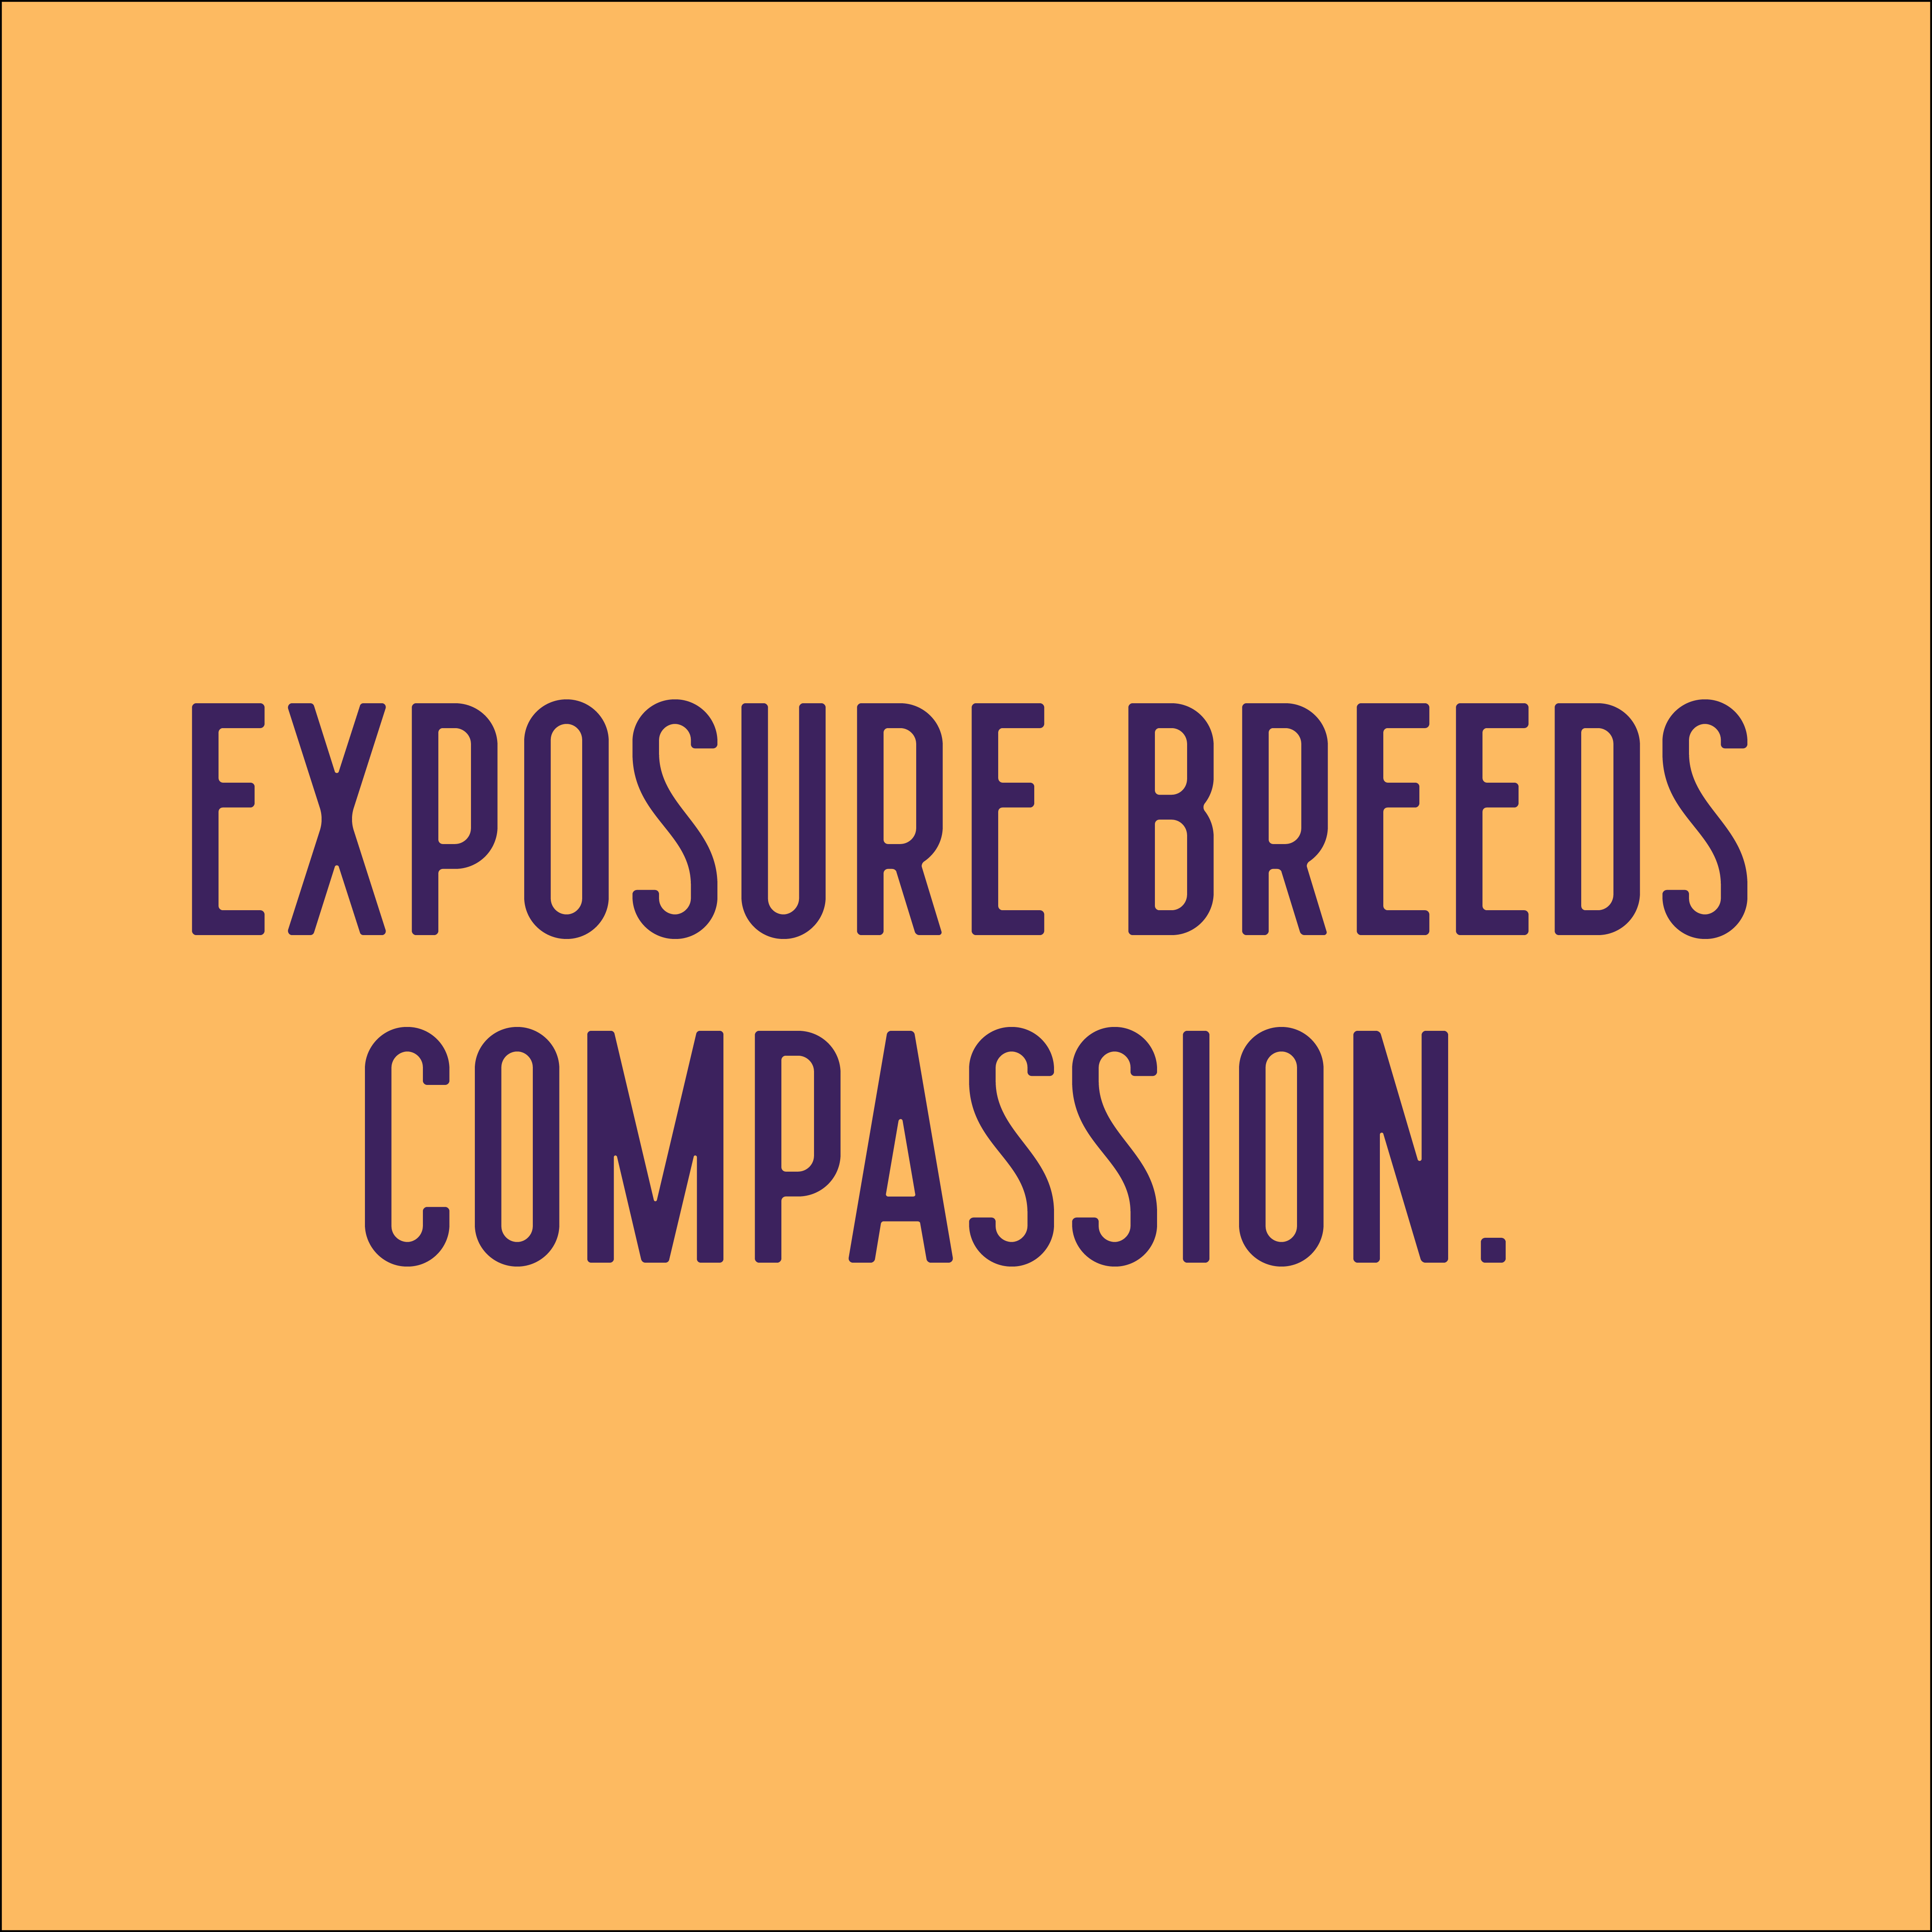 Image for Exposure Breeds Compassion contribution